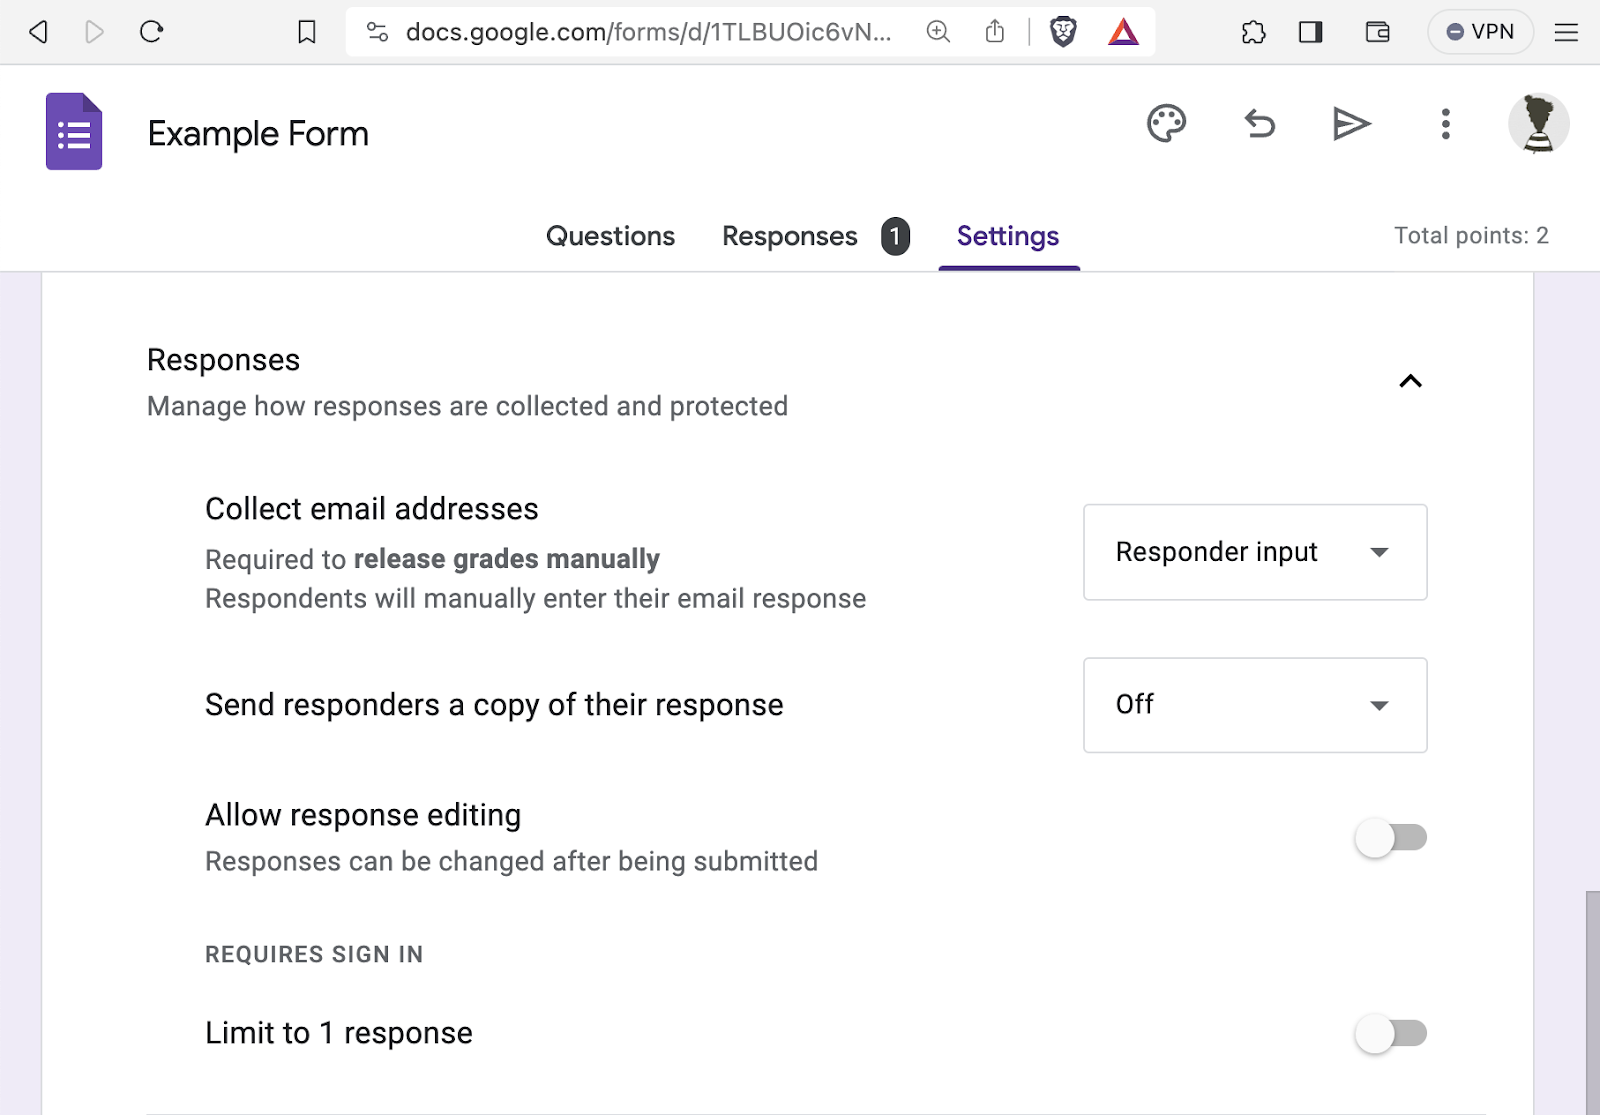 Spammers abuse Google Forms’ quiz to deliver scams